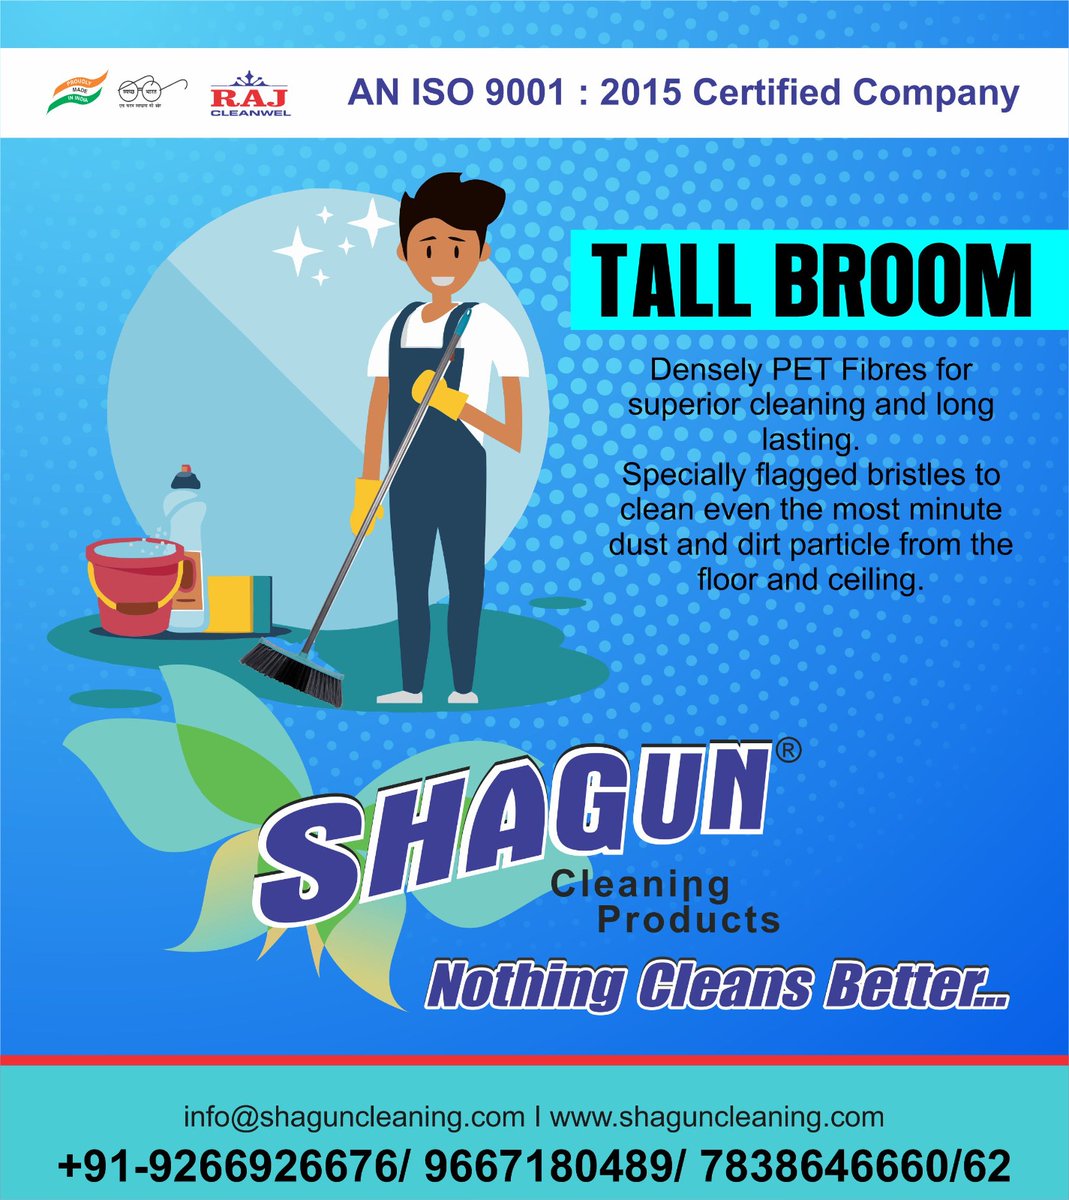 NOTHING CLEANS BETTER

#cleaning #clean #cleaningproducts #cleaningservices #cleanwipe #shaguncleaningproducts #shaguncleanwell #cleaningservice #broomstick #broom #handmade #instagram